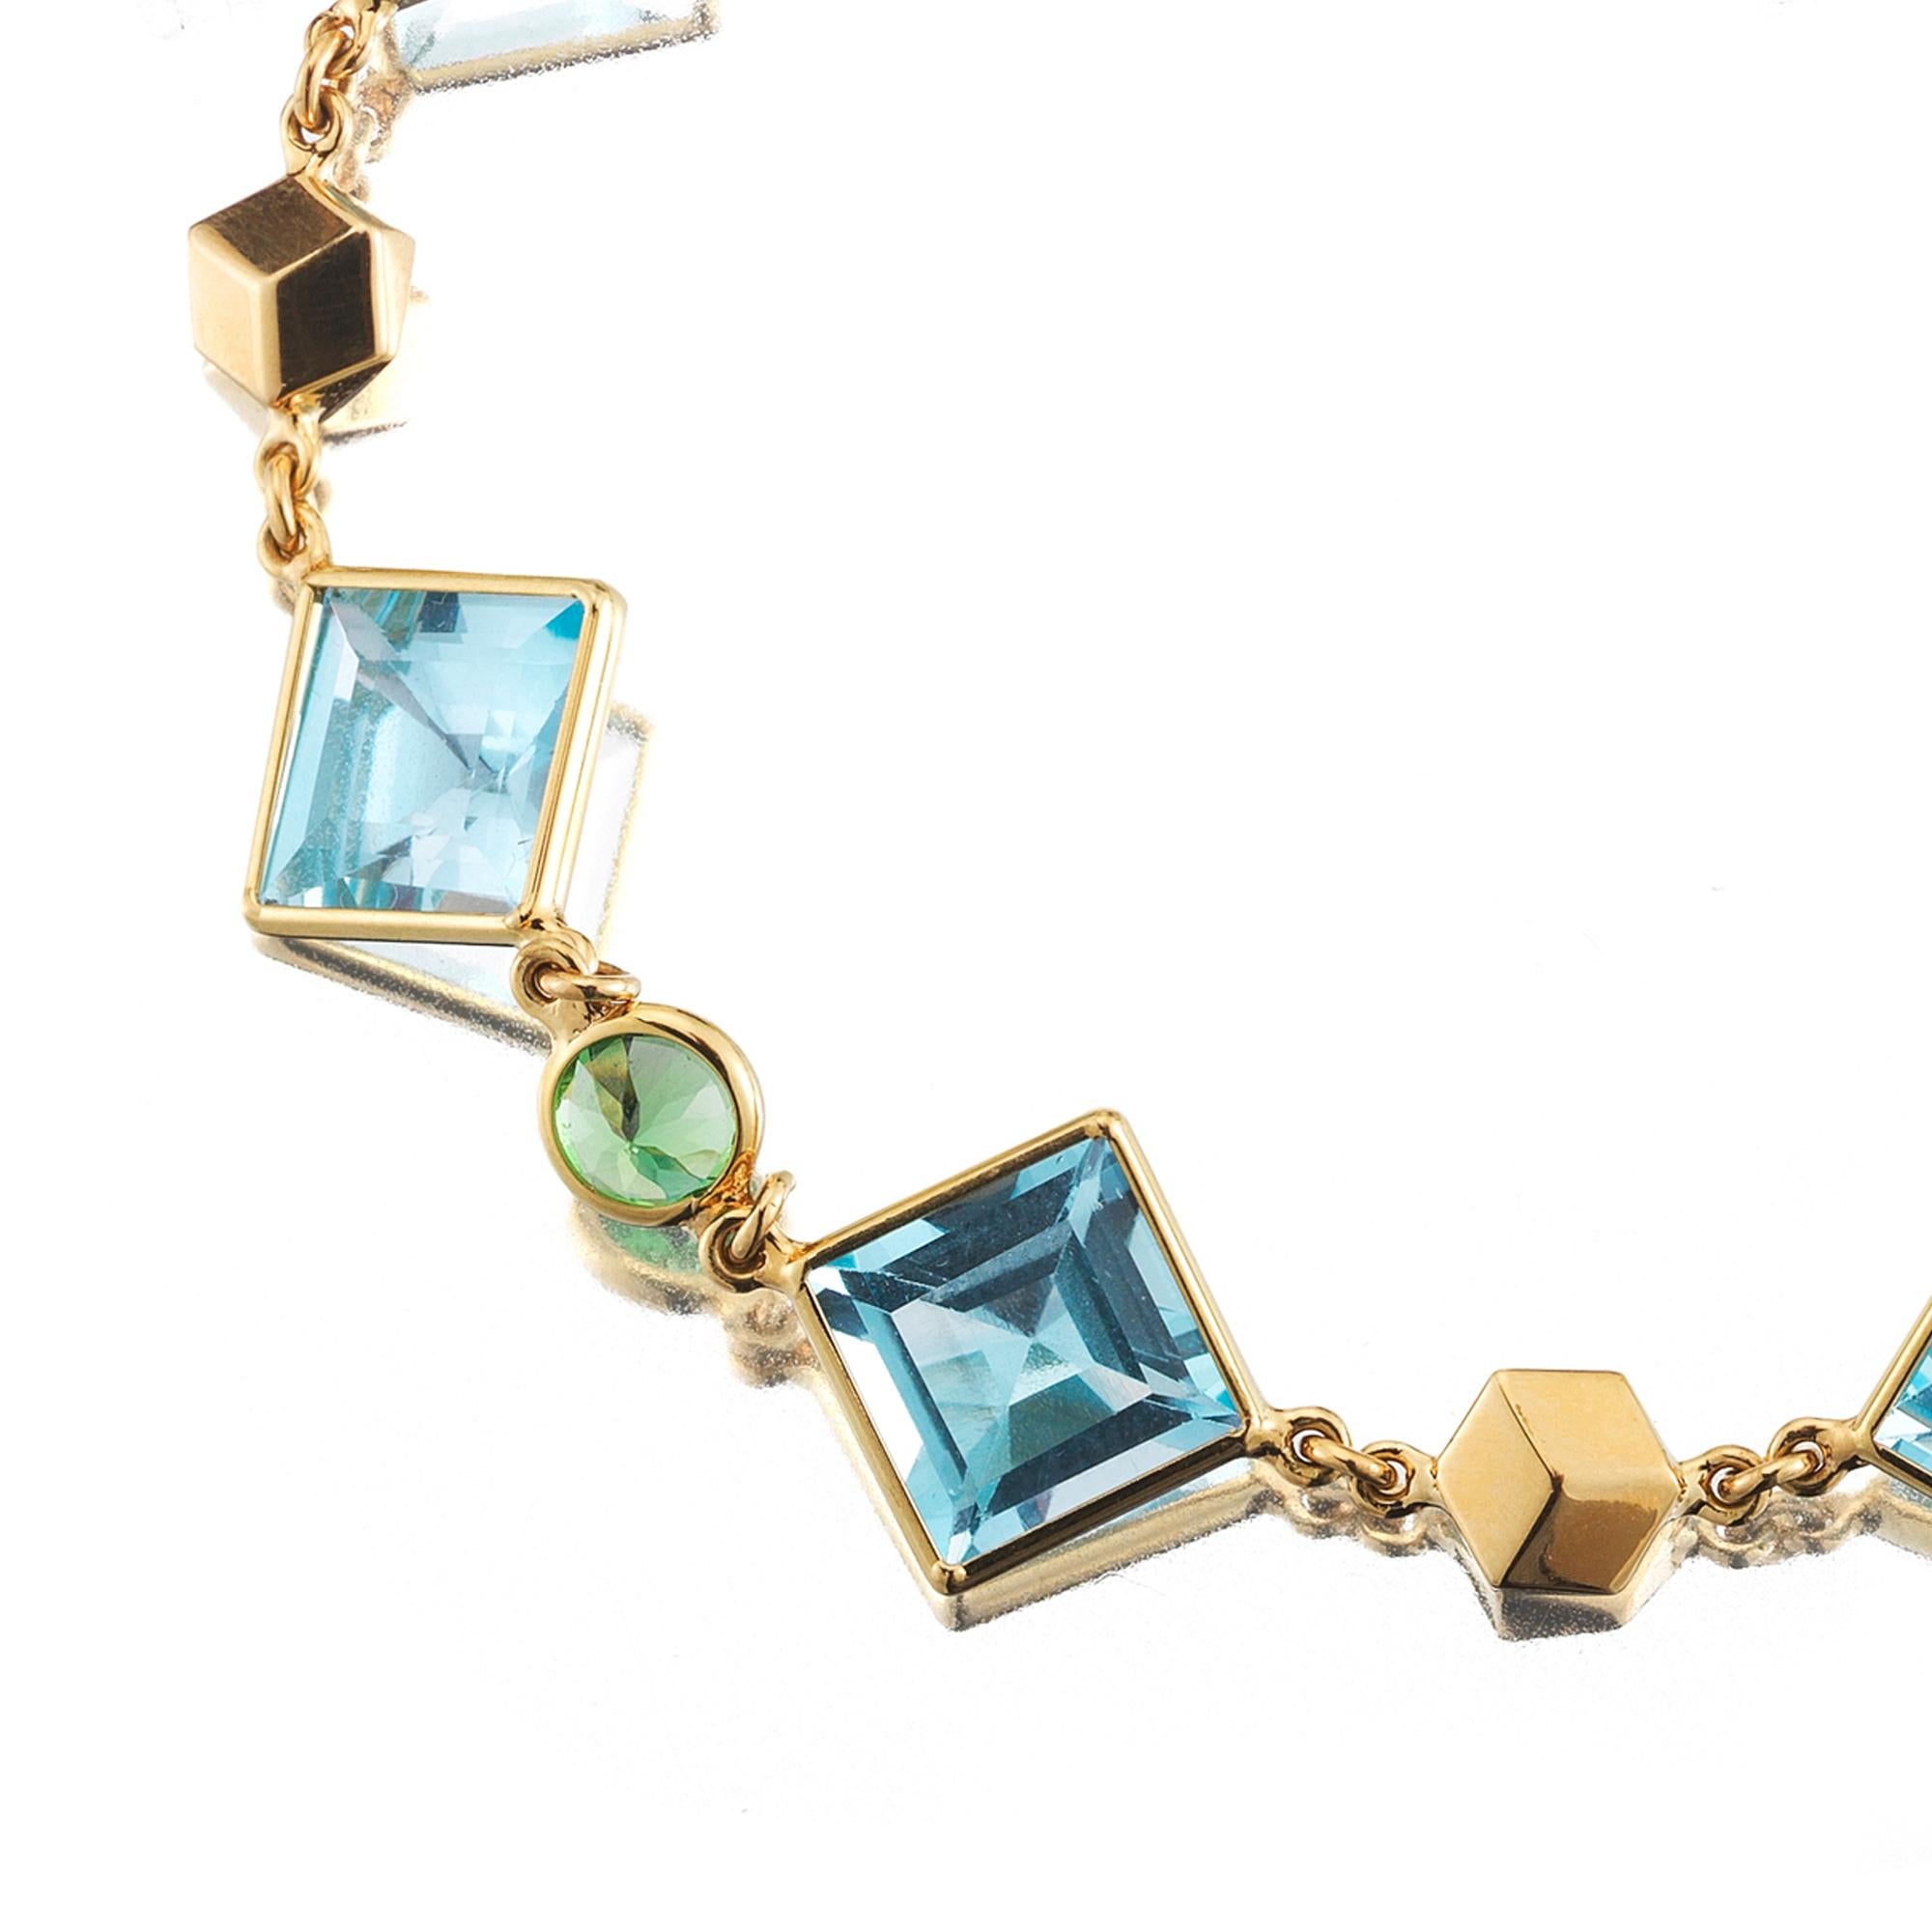 Contemporary Paolo Costagli 18K Yellow Gold Florentine Bracelet with Blue Topaz & Tsavorites For Sale